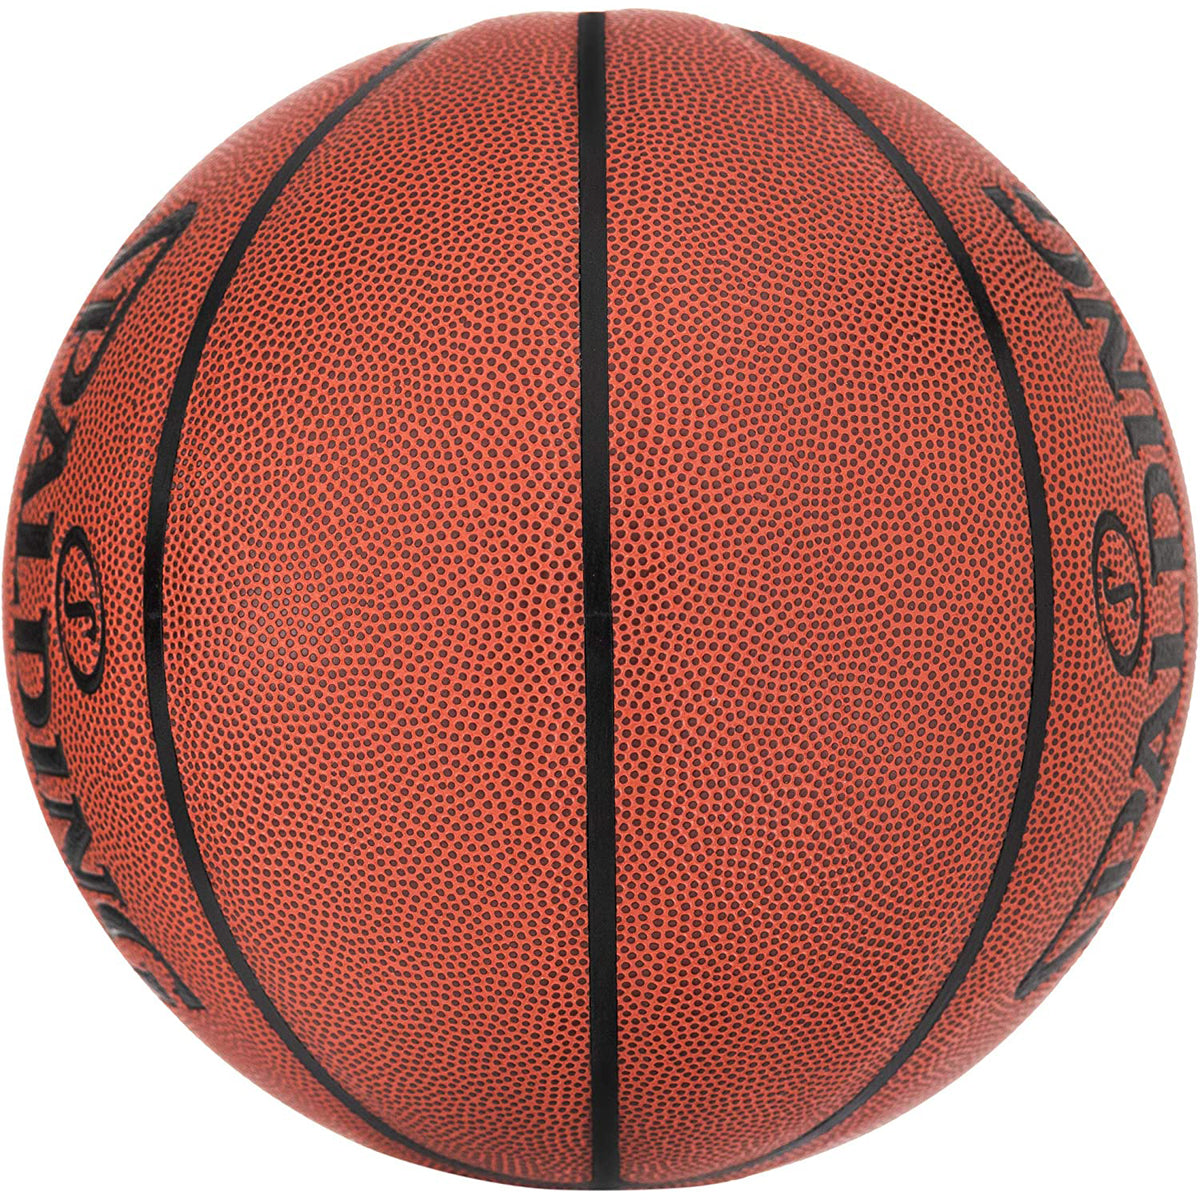 Spalding TF Trainer Weighted Indoor Basketball Spalding